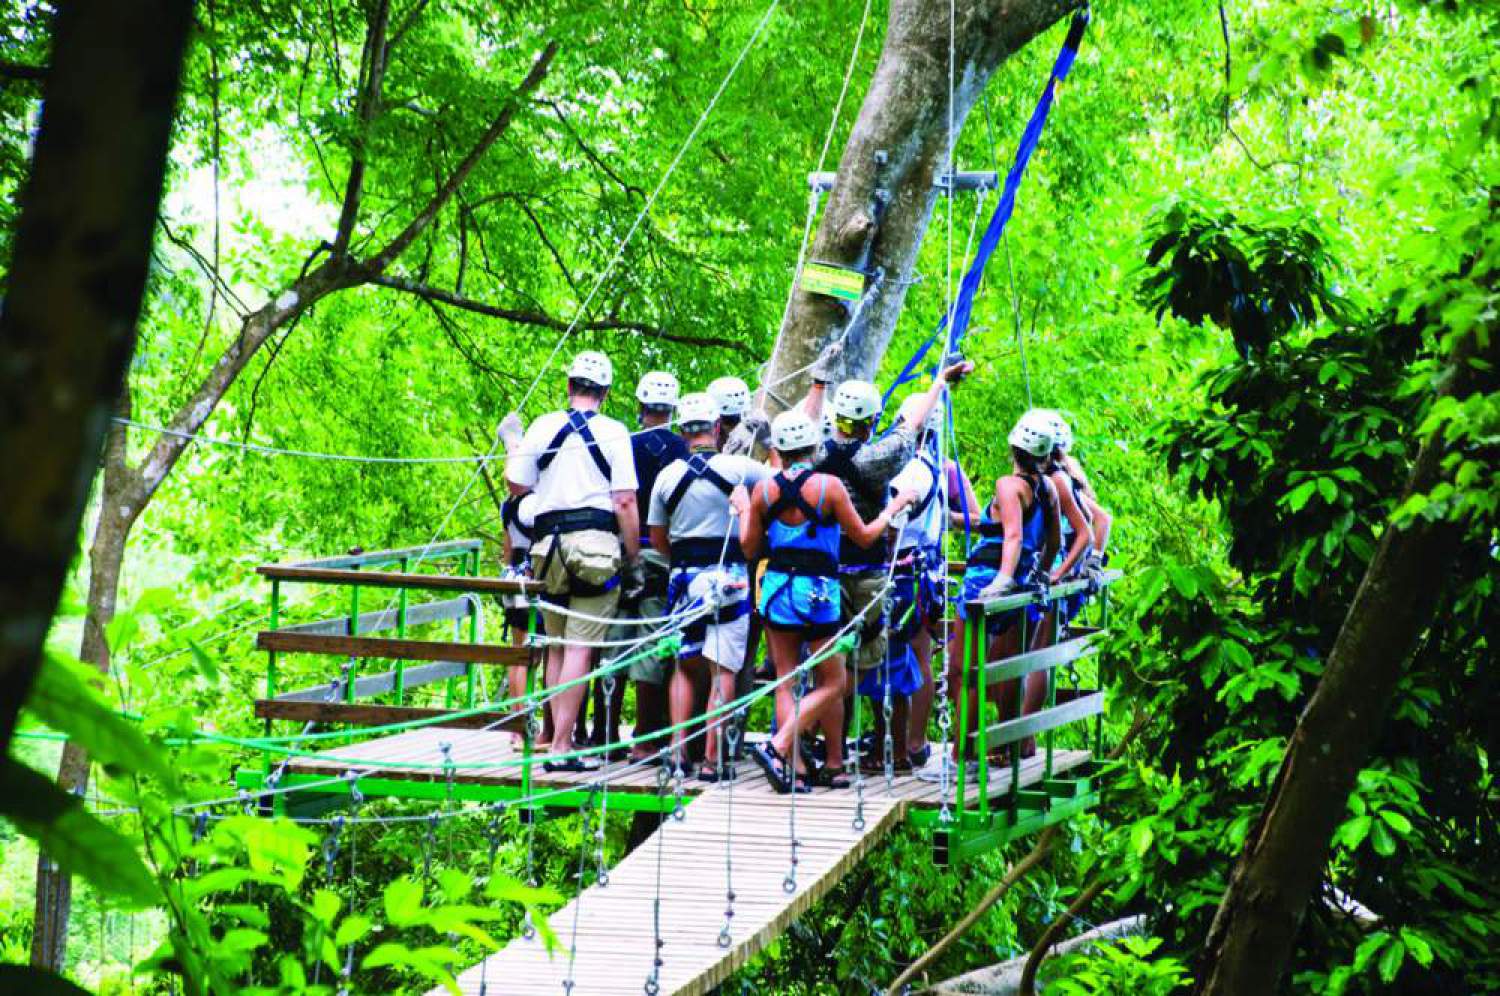 Going ziplining in the forests on Jamaica